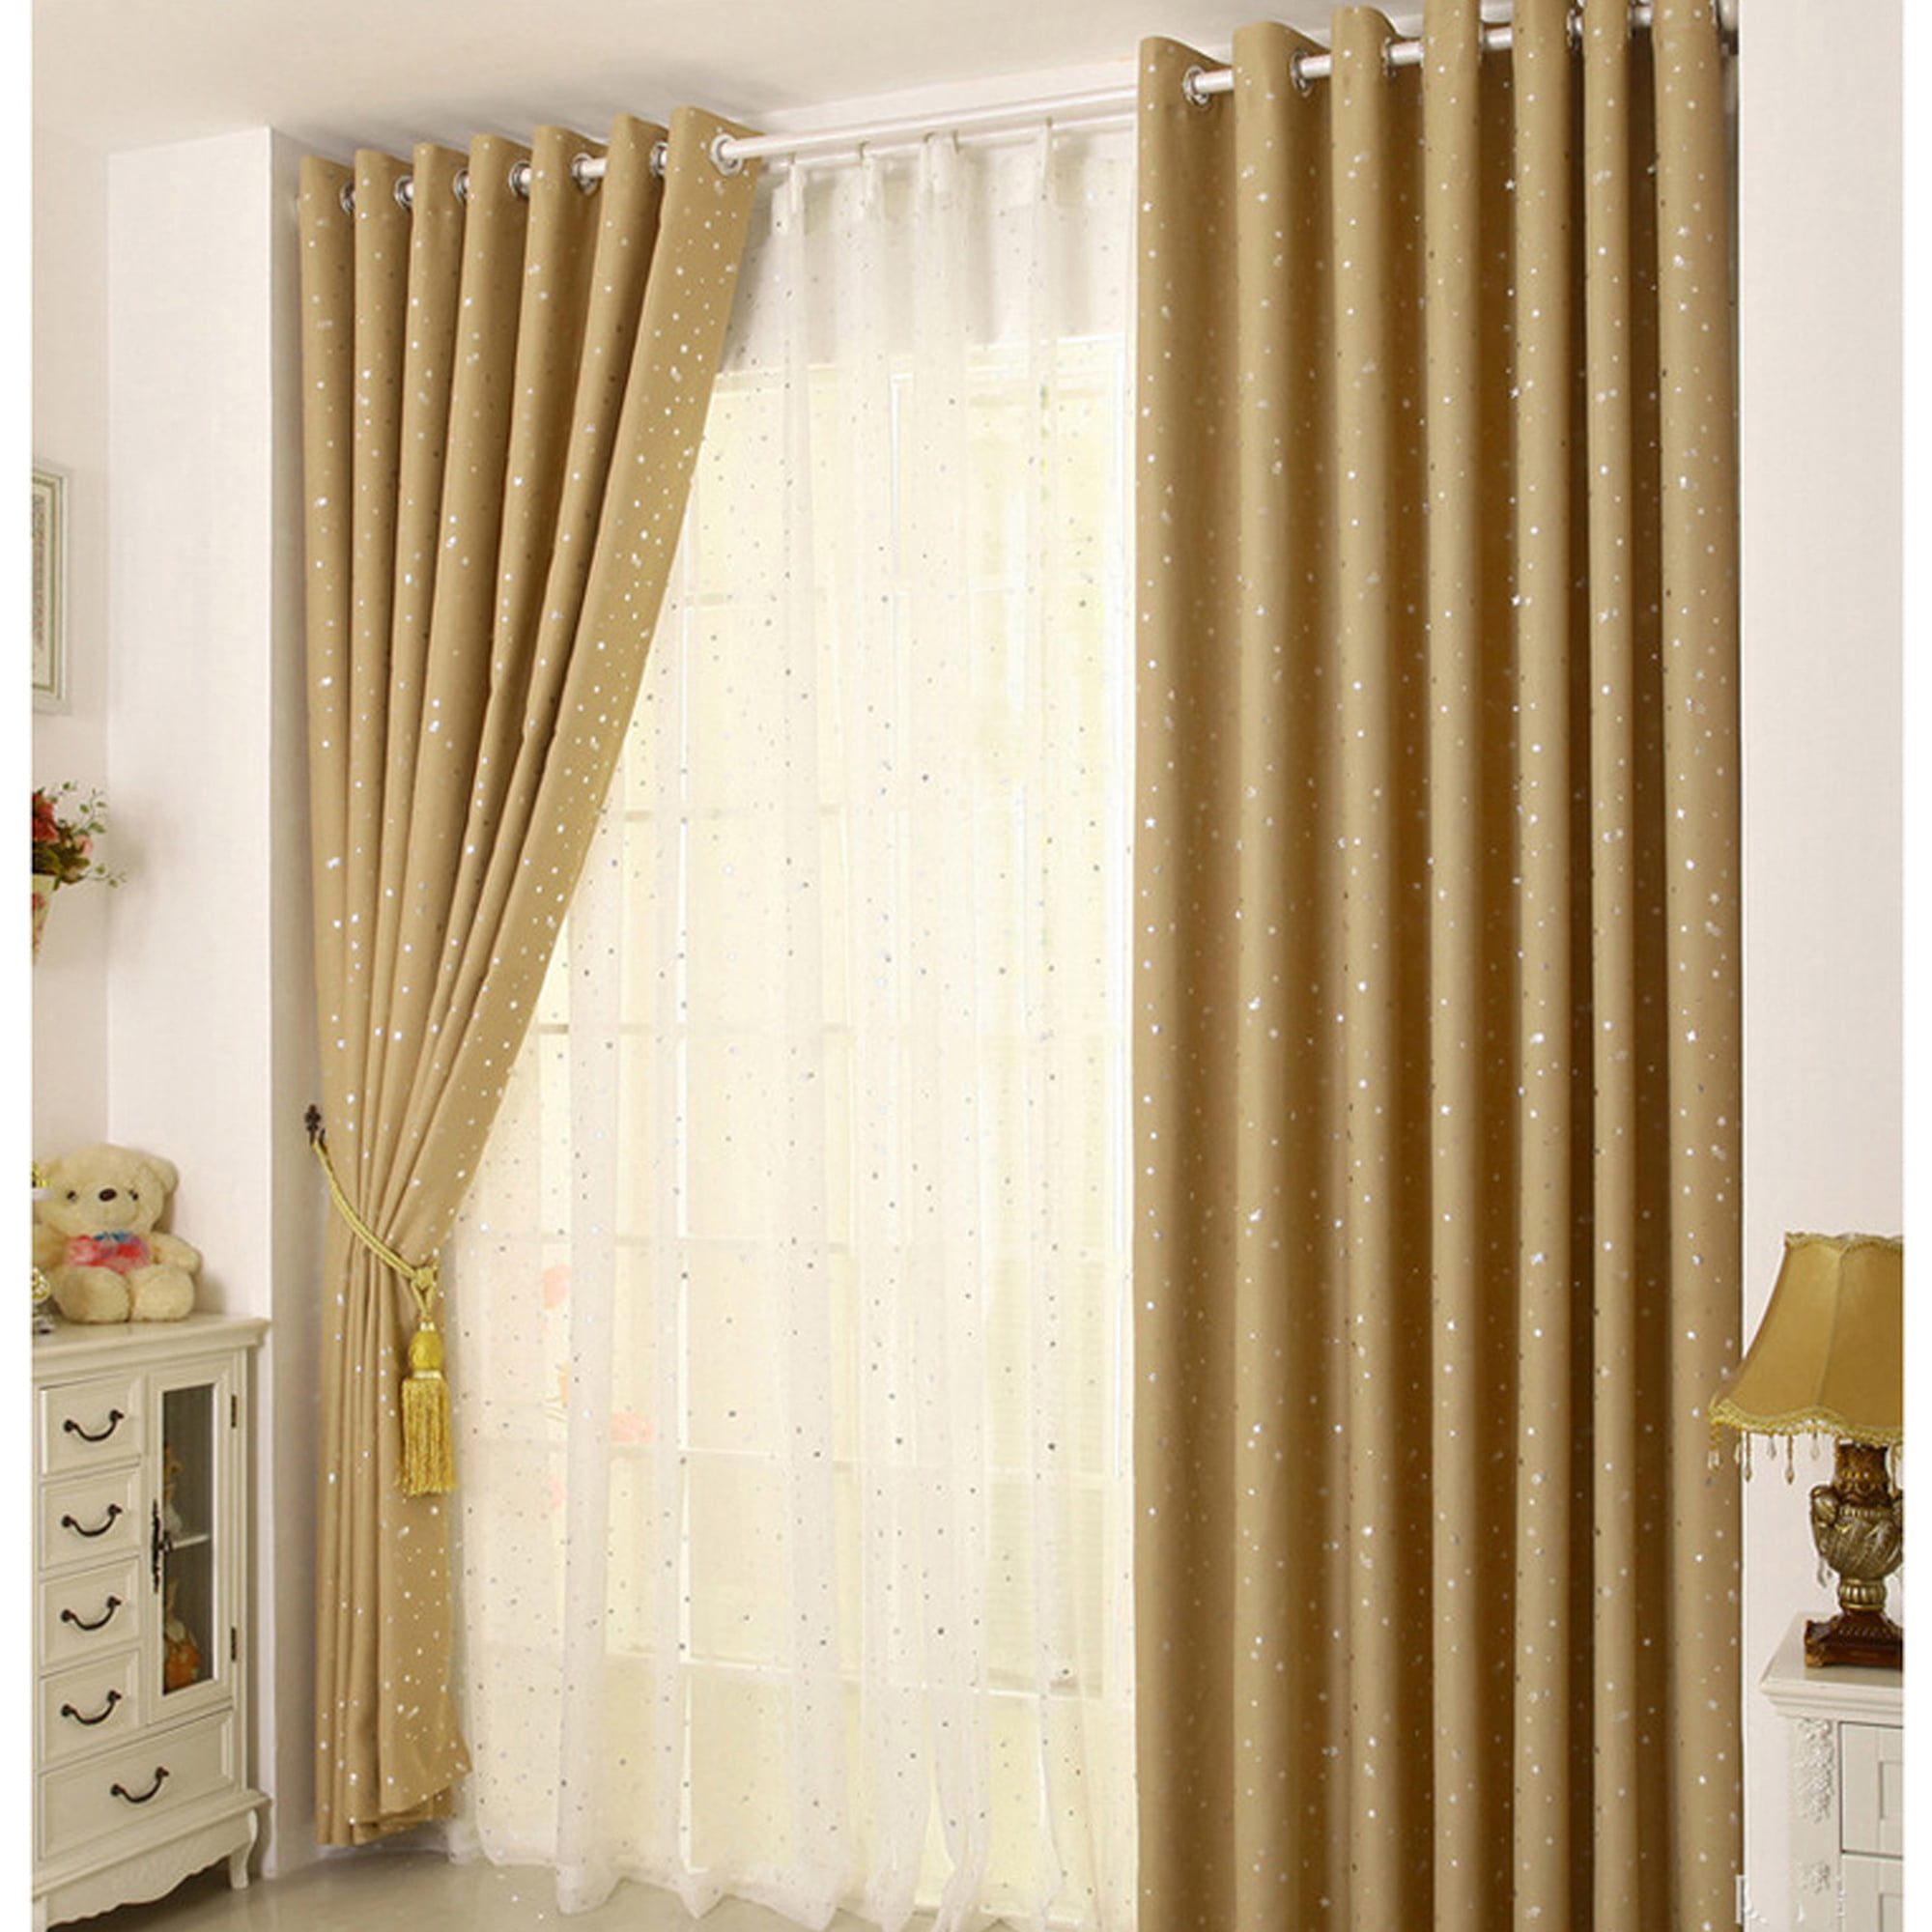 DODOING Bedroom Blackout Curtains, Solid Color Soft Grommet Energy